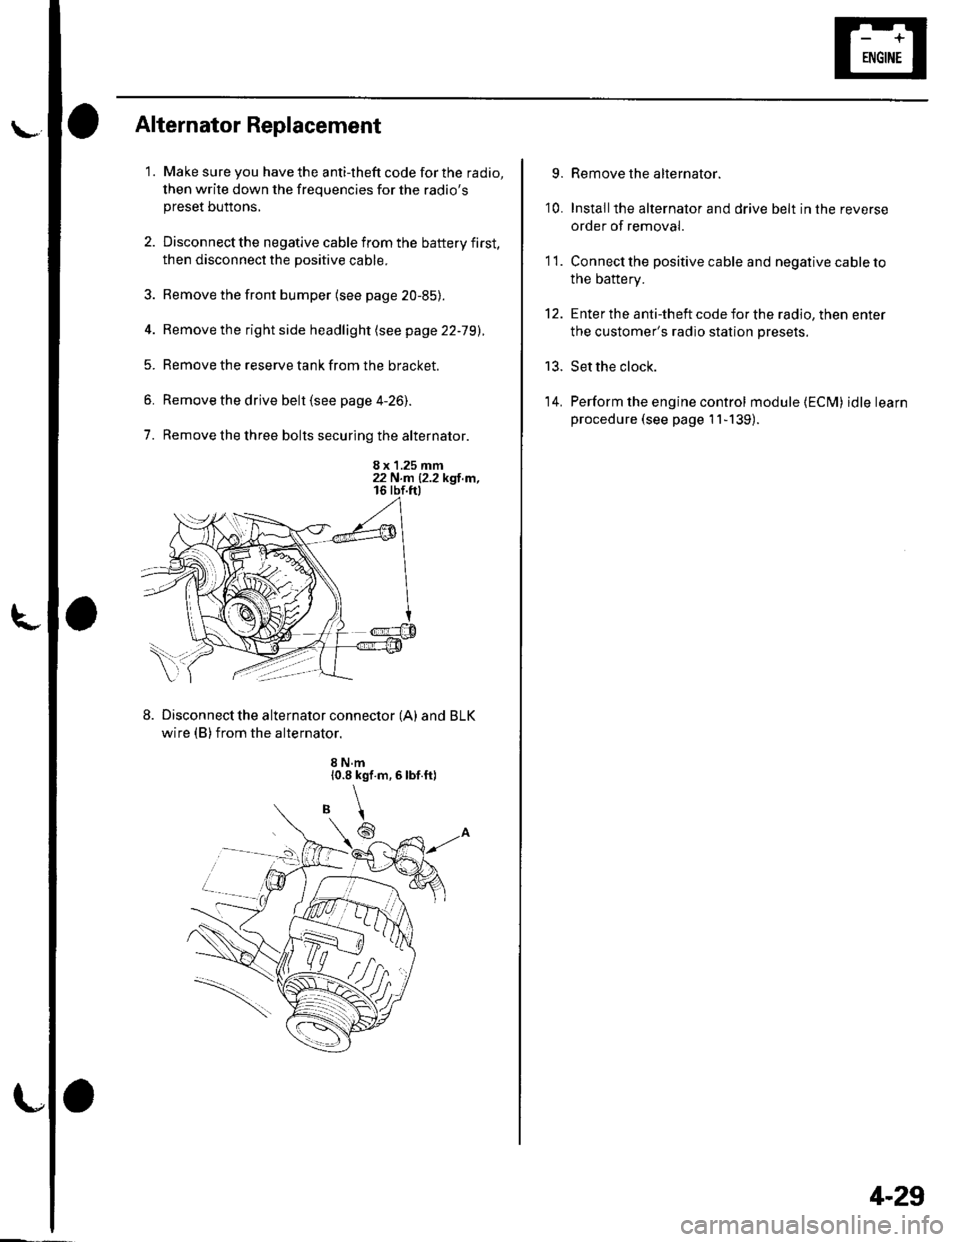 HONDA CIVIC 2003 7.G Workshop Manual l\-Alternator Replacement
1. Make sure you have the anti-theft code for the radio,
then write down the frequencies for the radiospreset buttons,
2. Disconnect the negative cable from the battery firs